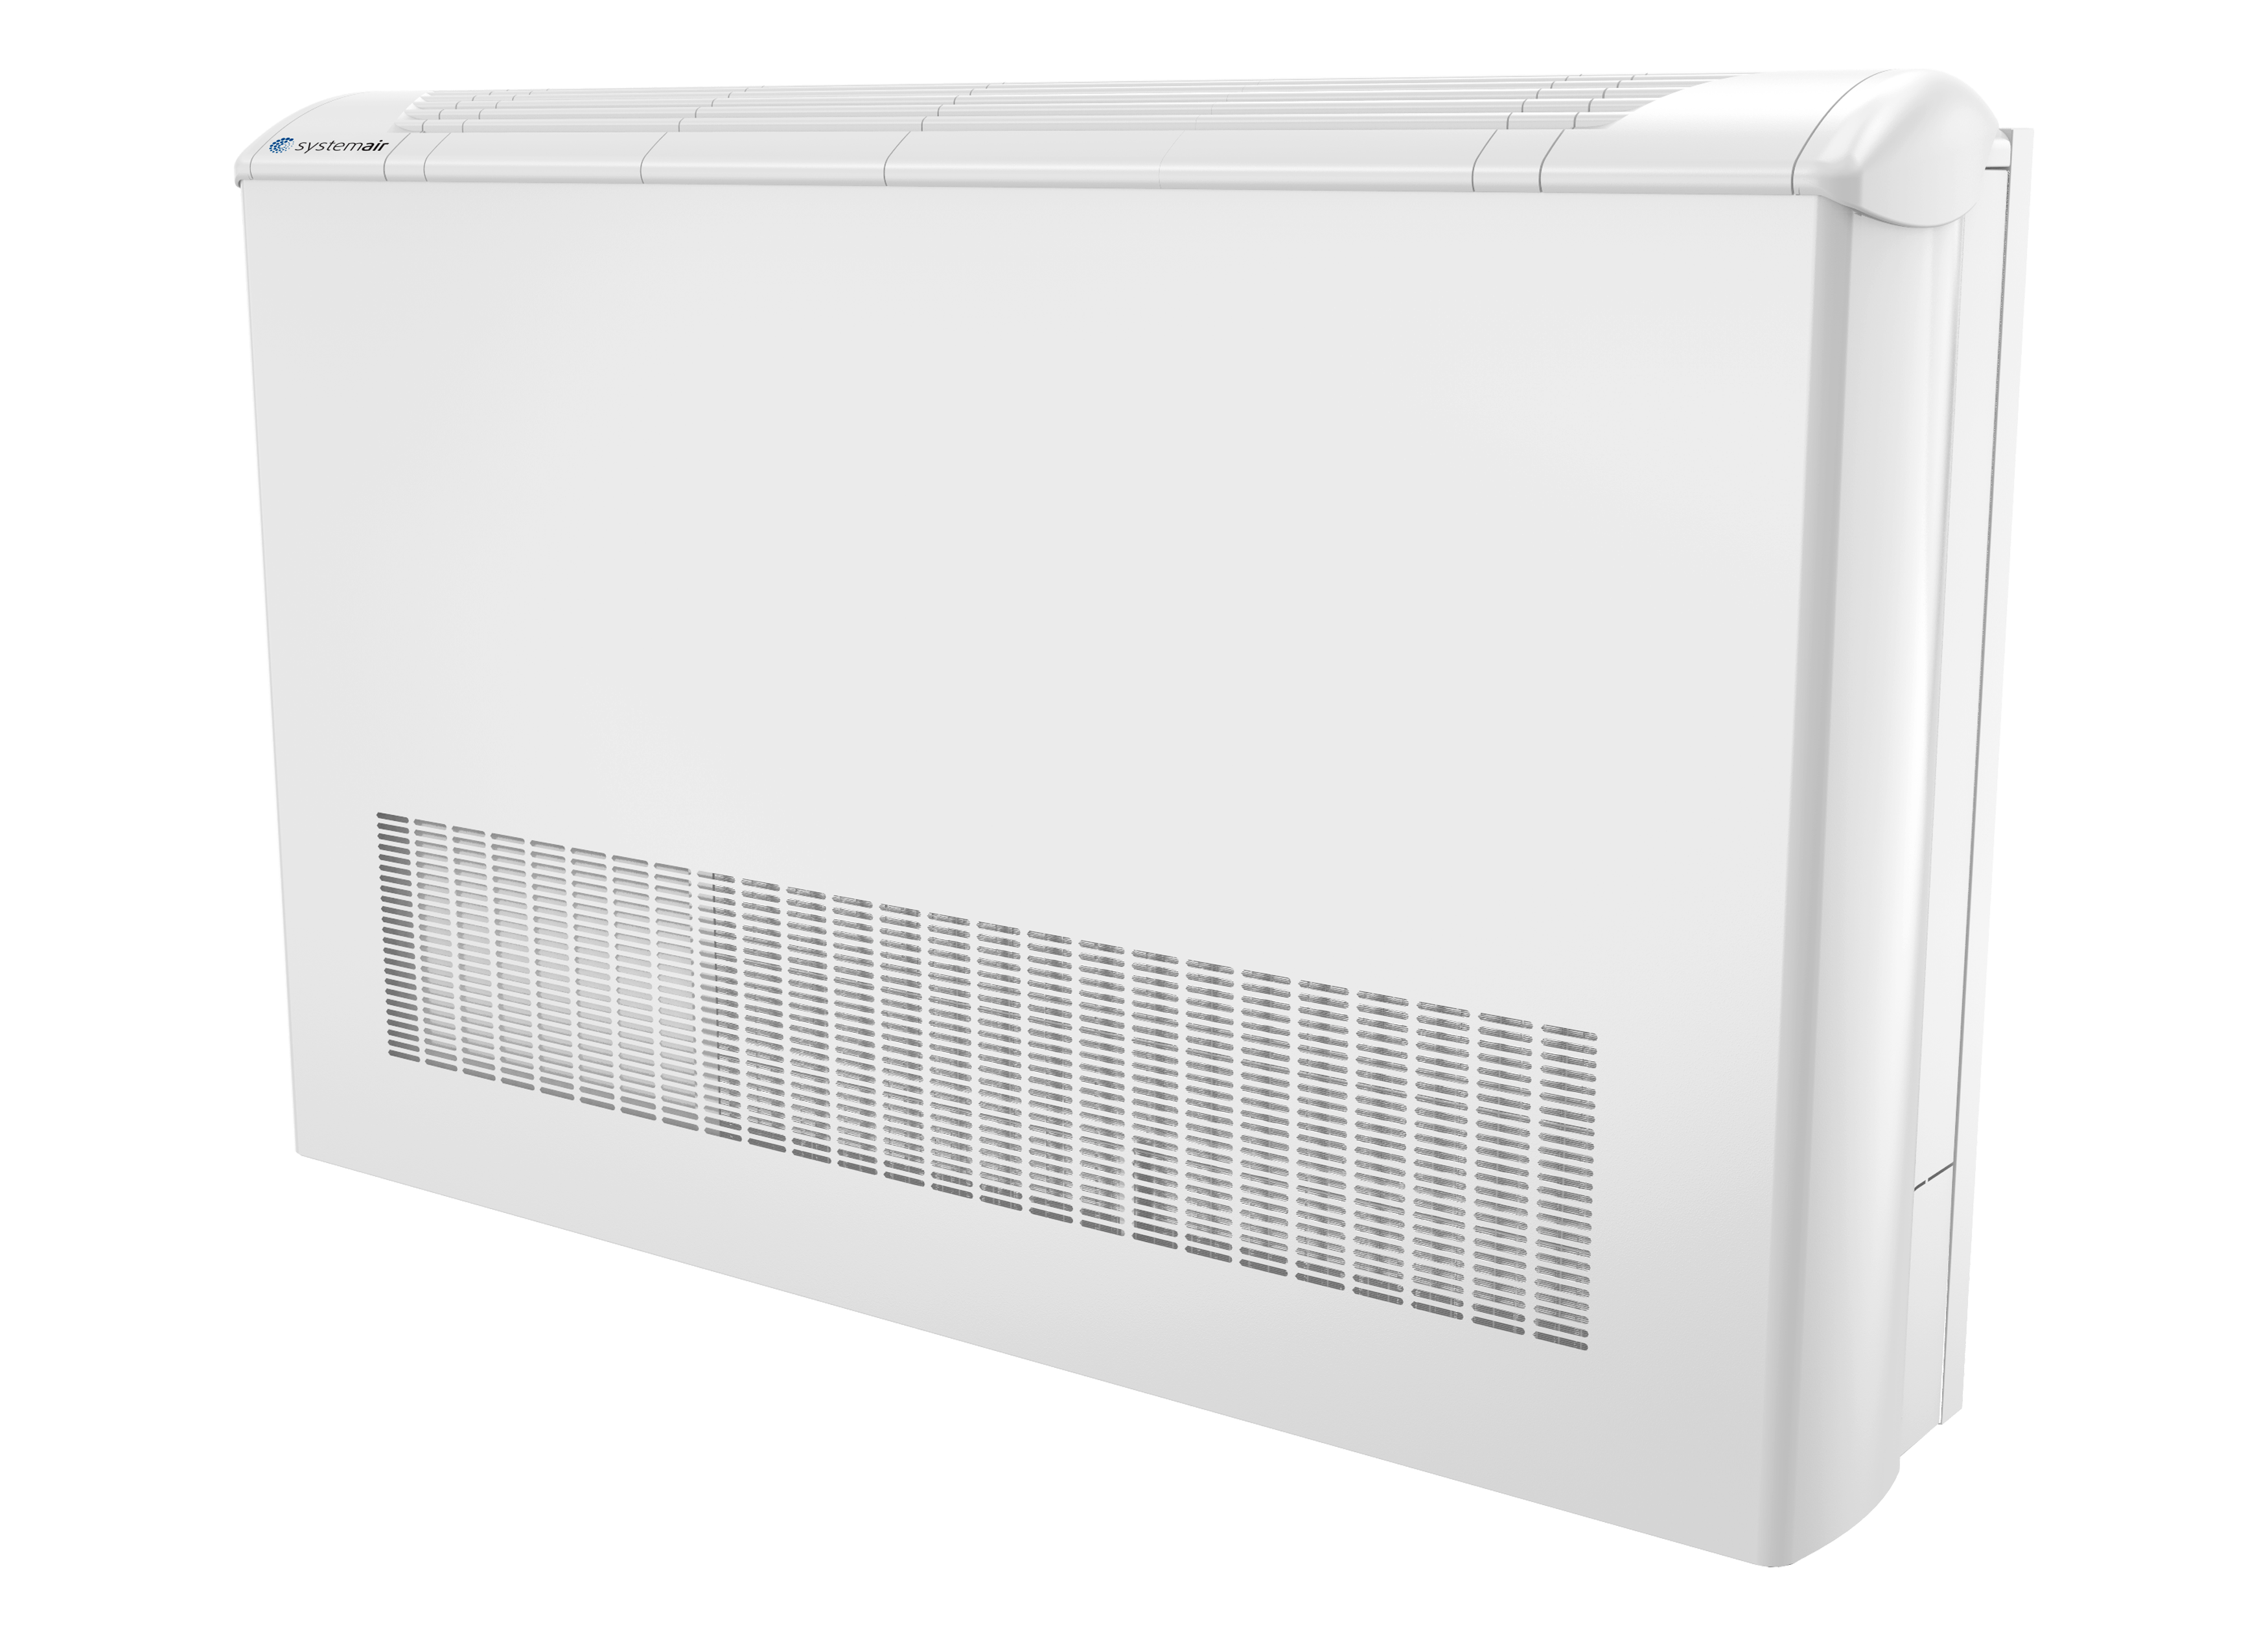 SYSCW-AR R513A - Water Source Heat Pumps - Air Conditioners - Products - Systemair